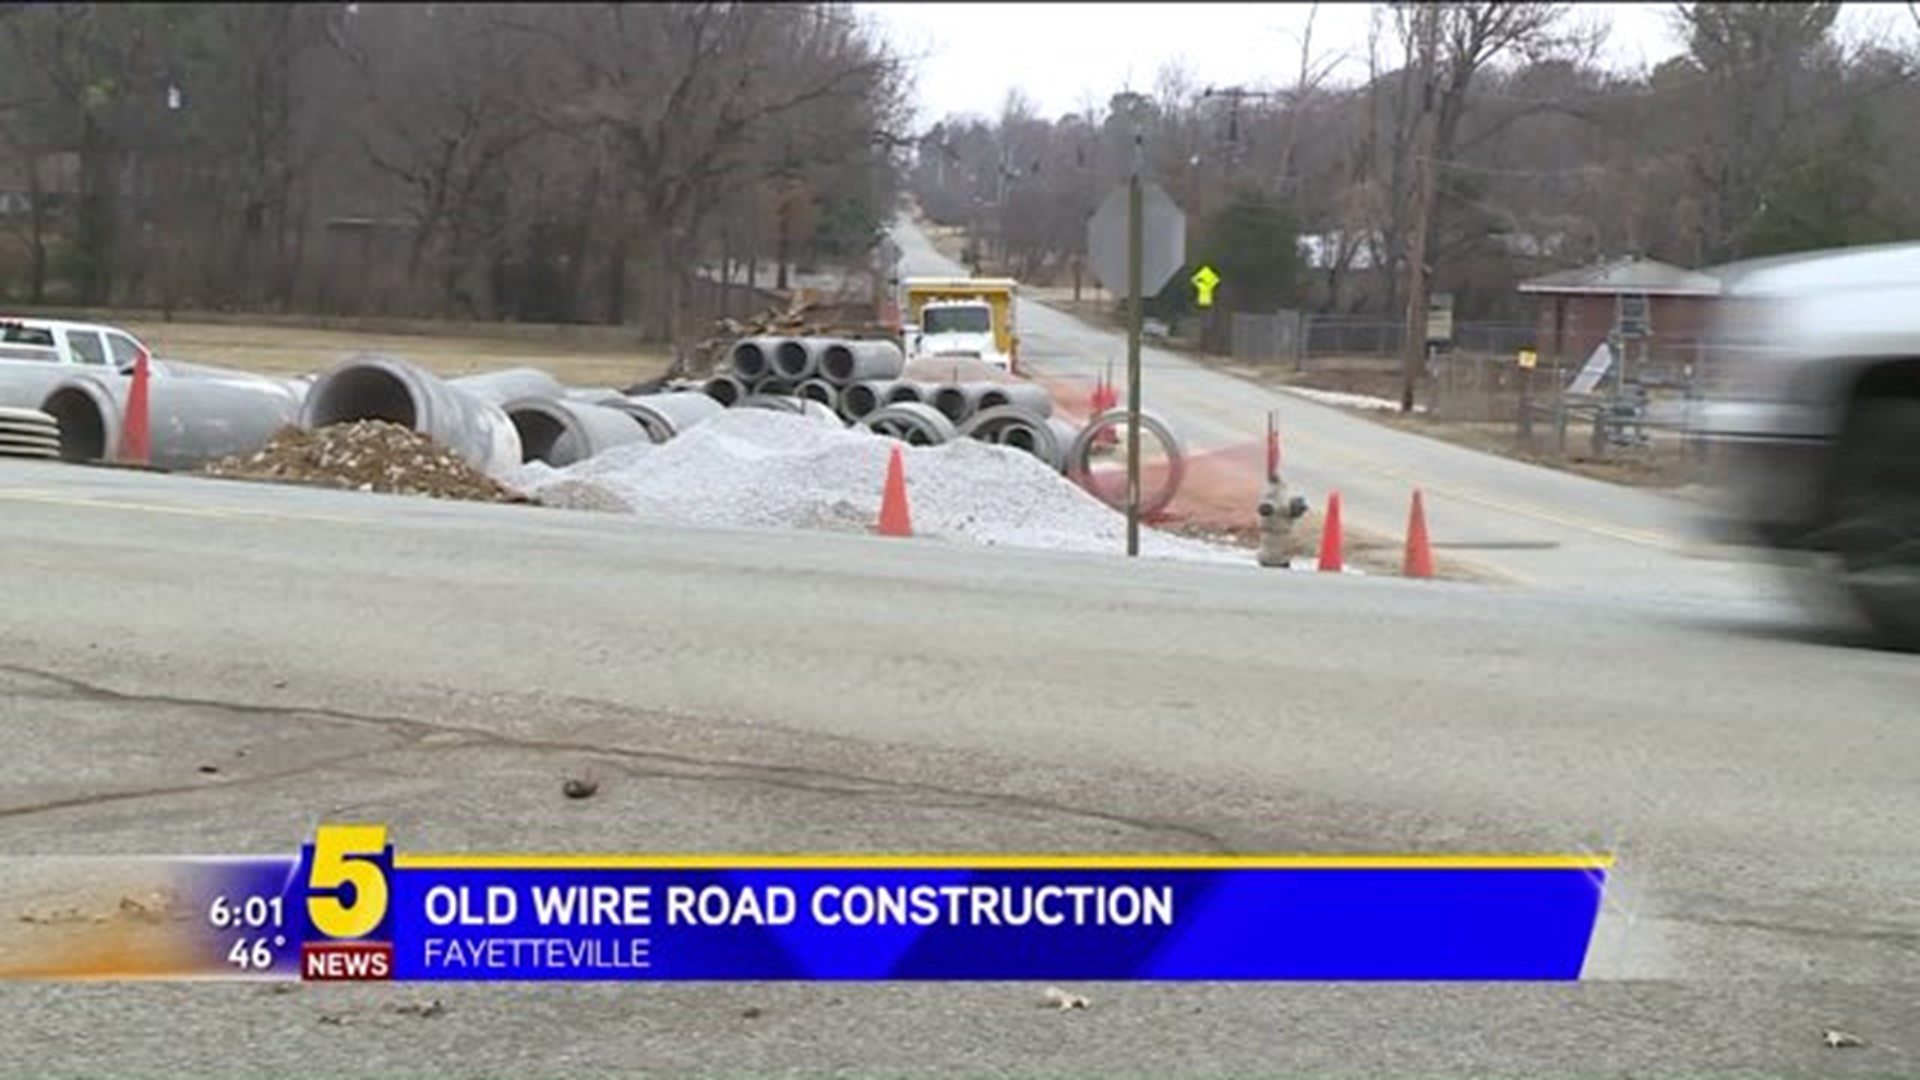 OLD WIRE ROAD CONSTRUCTION